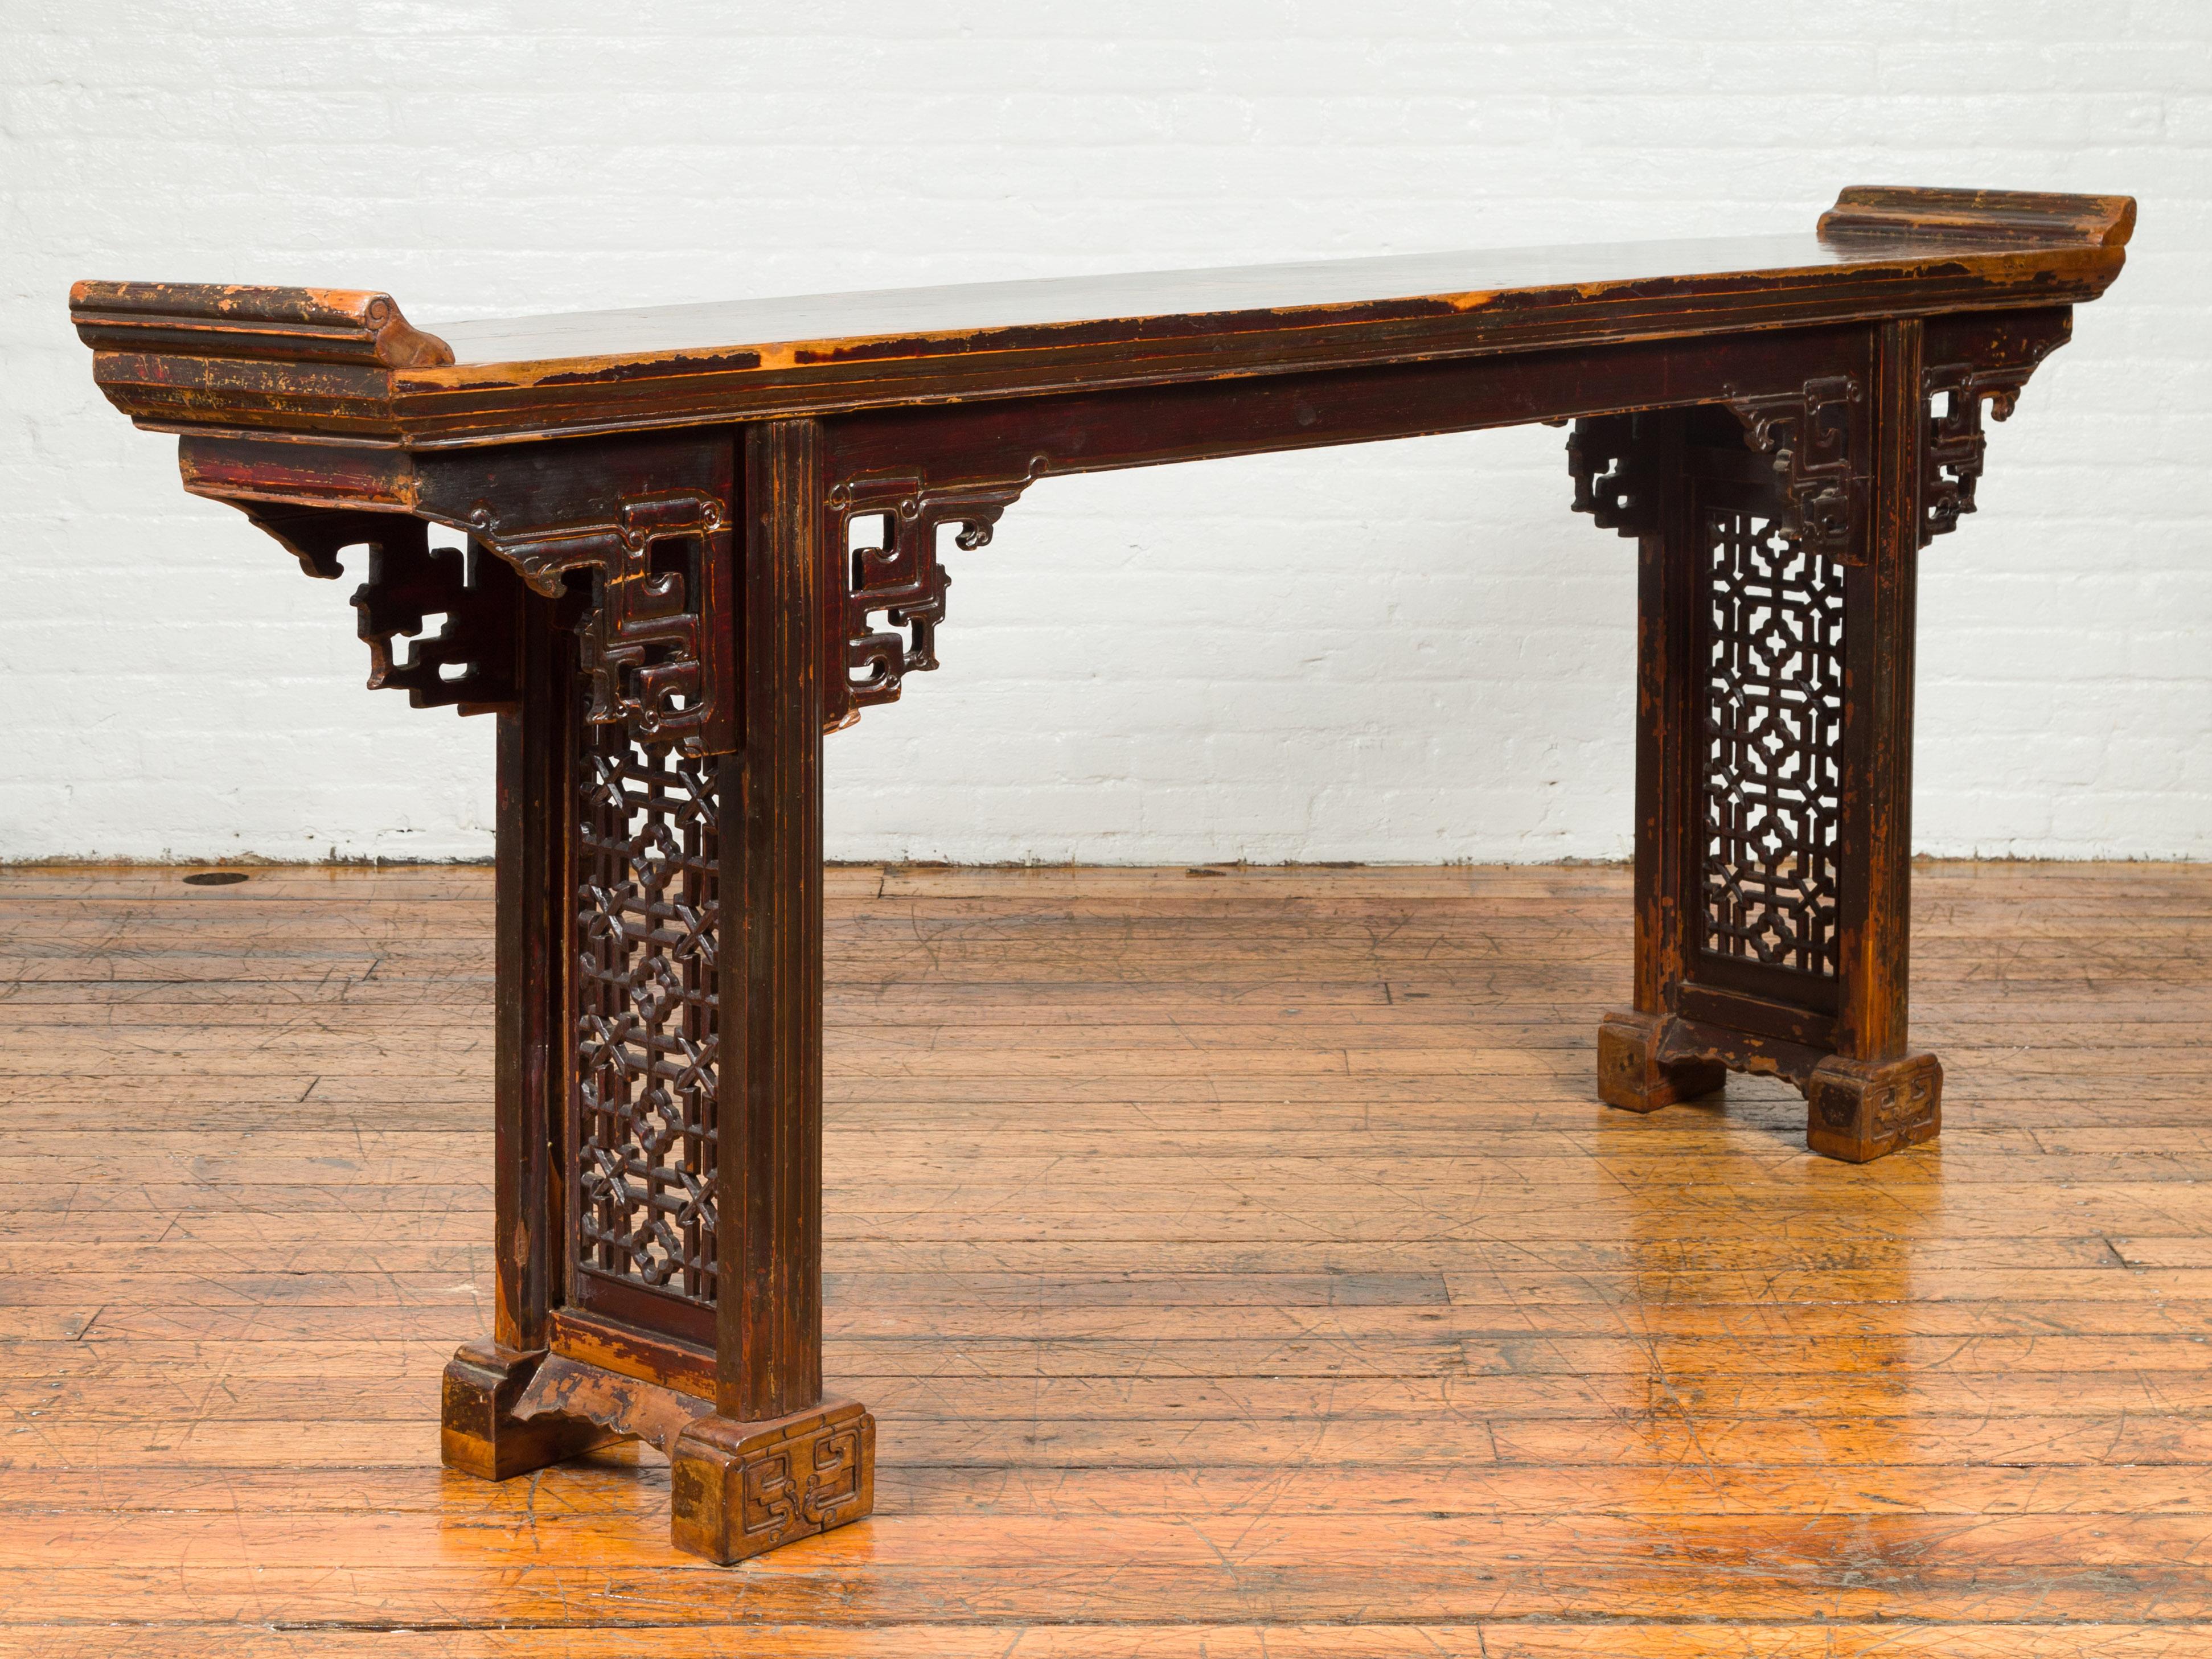 A Chinese Qing dynasty period altar console table from the 19th century, with dark distressed patina, everted flanges, carved spandrels and sides. Born in China during the Qing dynasty, this altar console table features a rectangular planked top